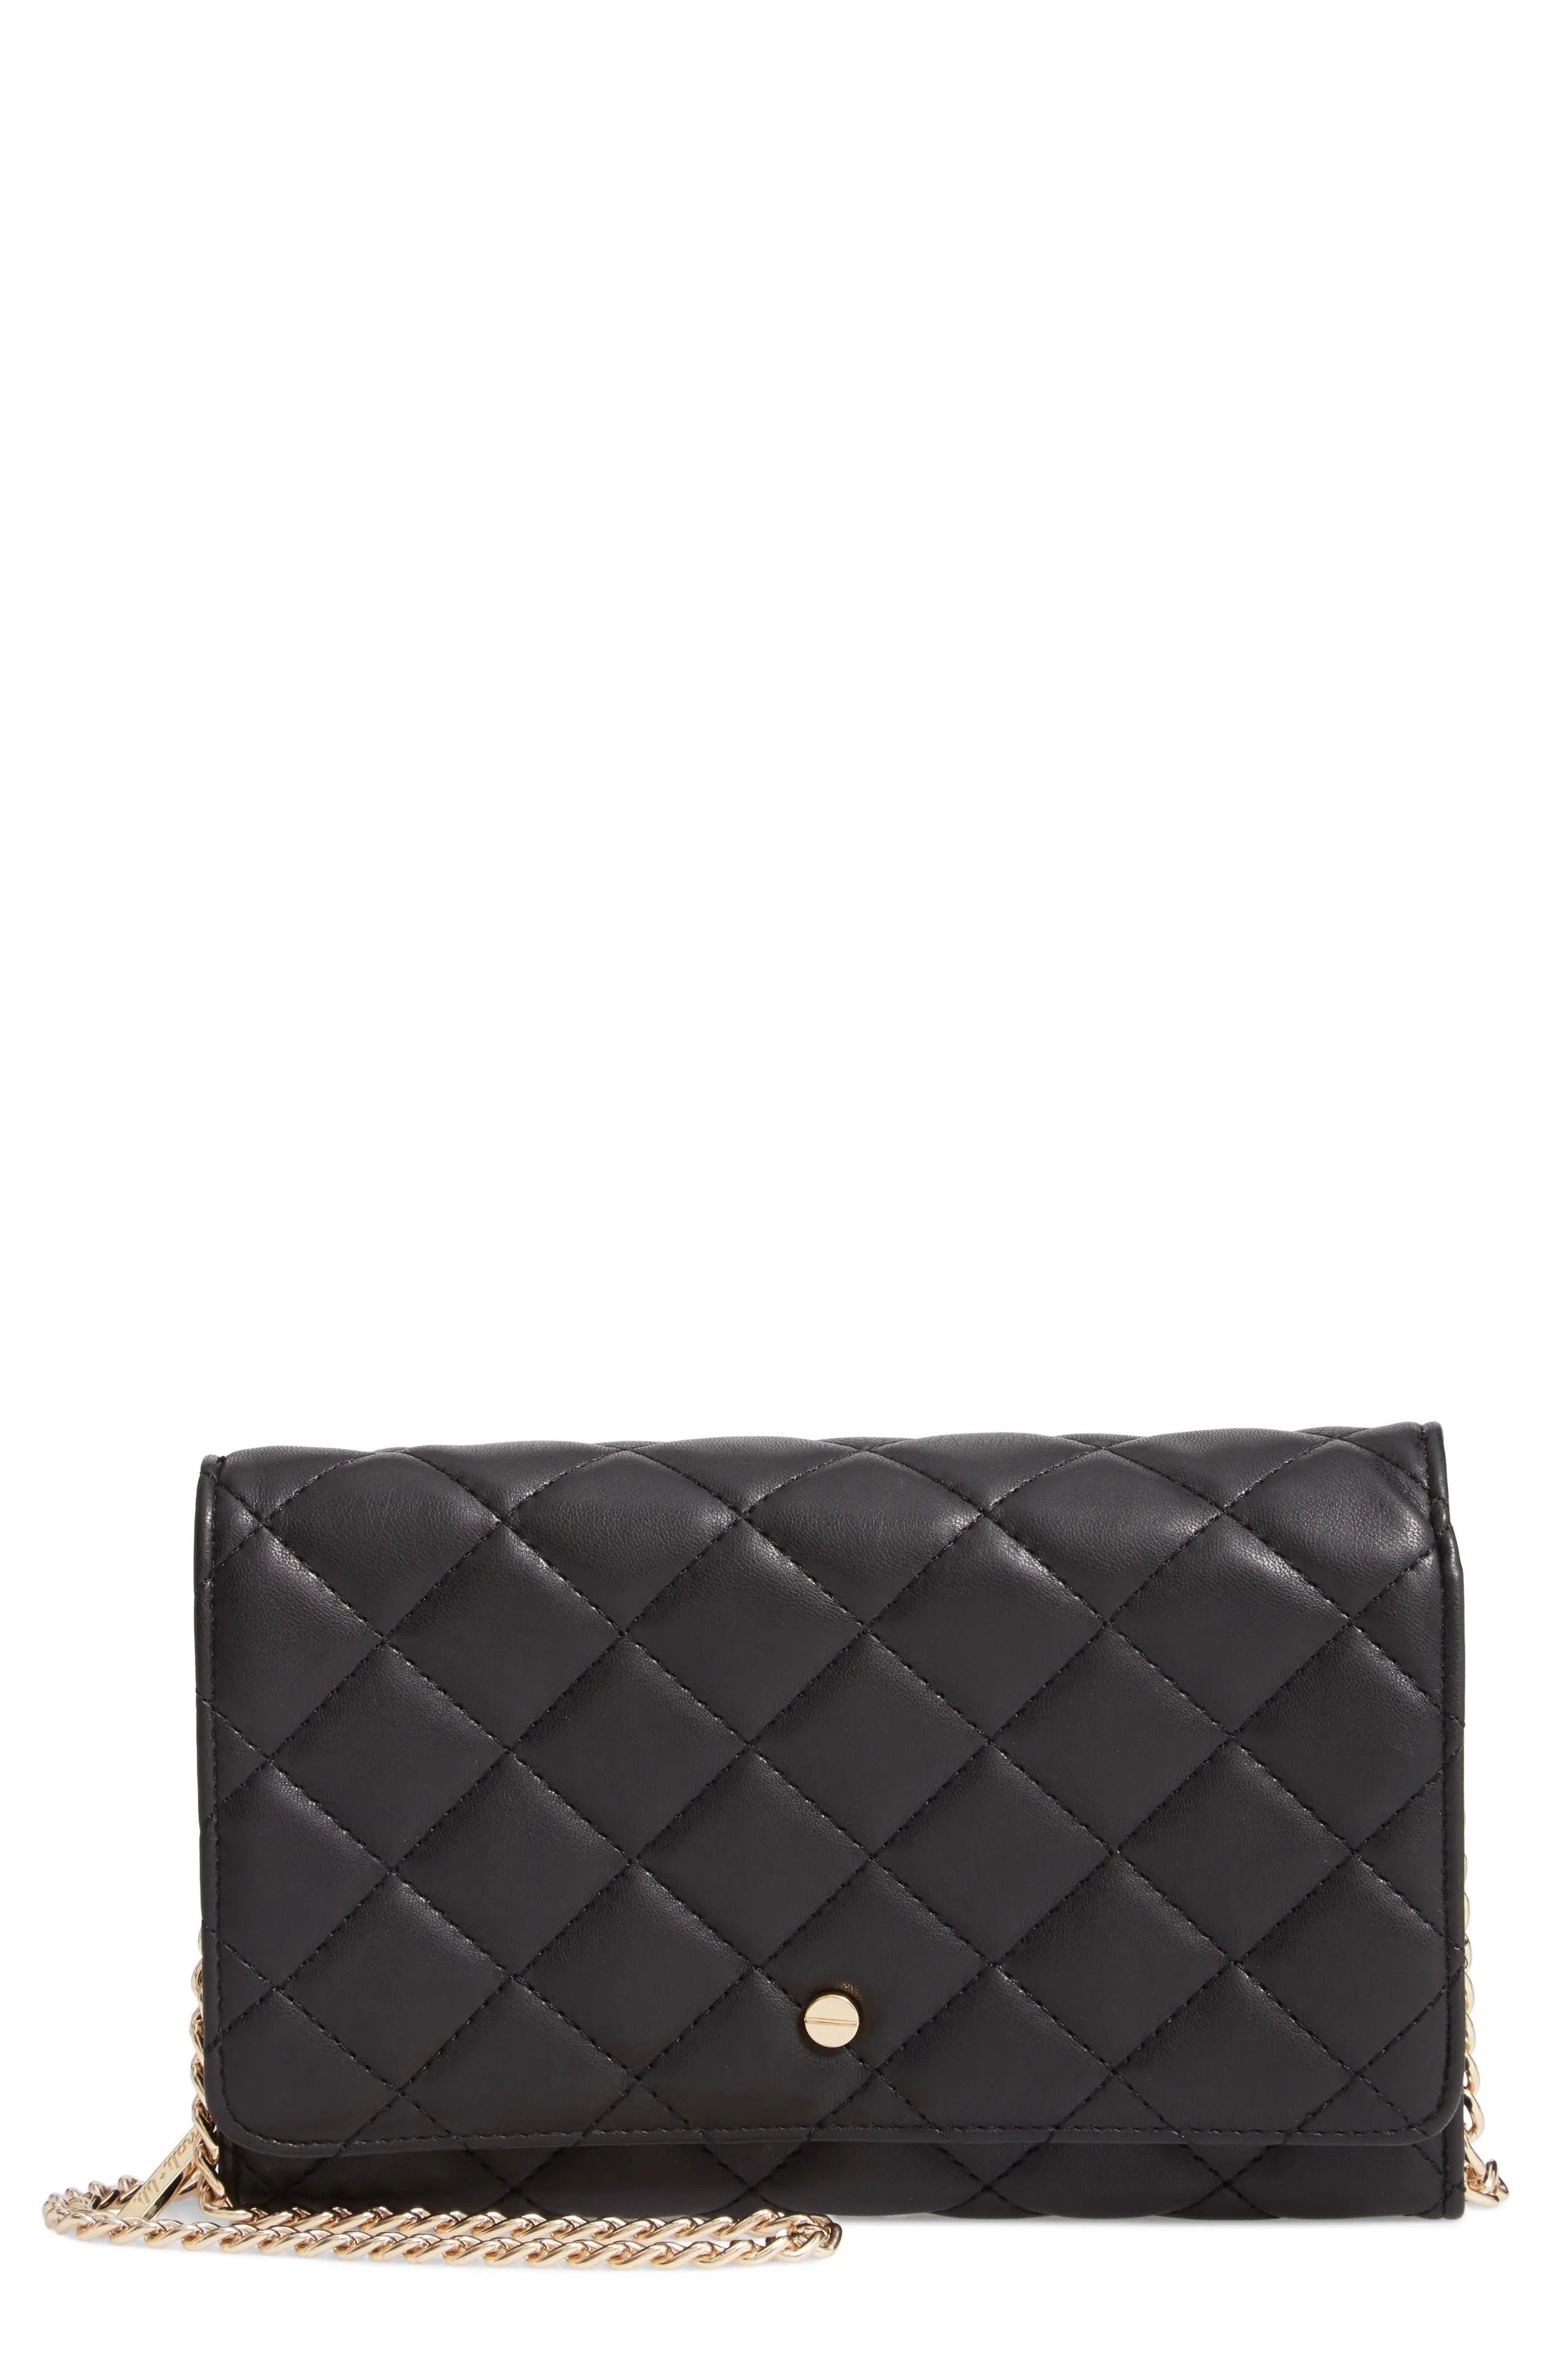 Mali + Lili Ciara Quilted Vegan Leather Convertible Clutch | Nordstrom